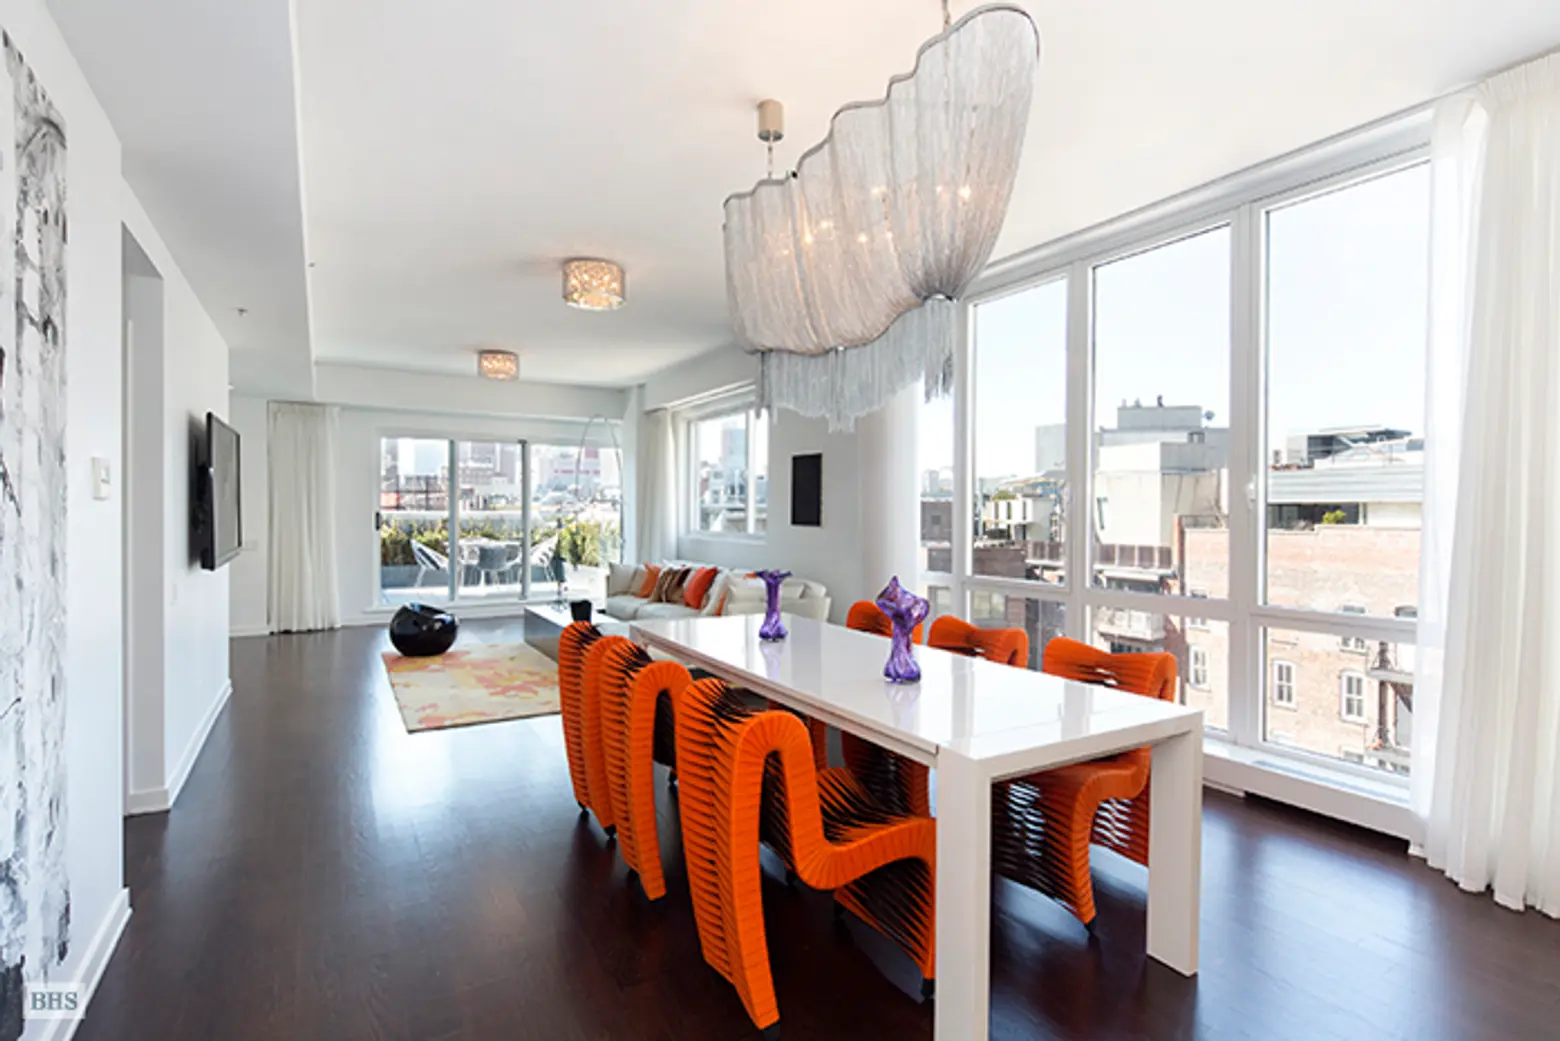 Million Dollar Listing’s Ryan Serhant Nabs a Love Nest at the Renwick for $3.7M